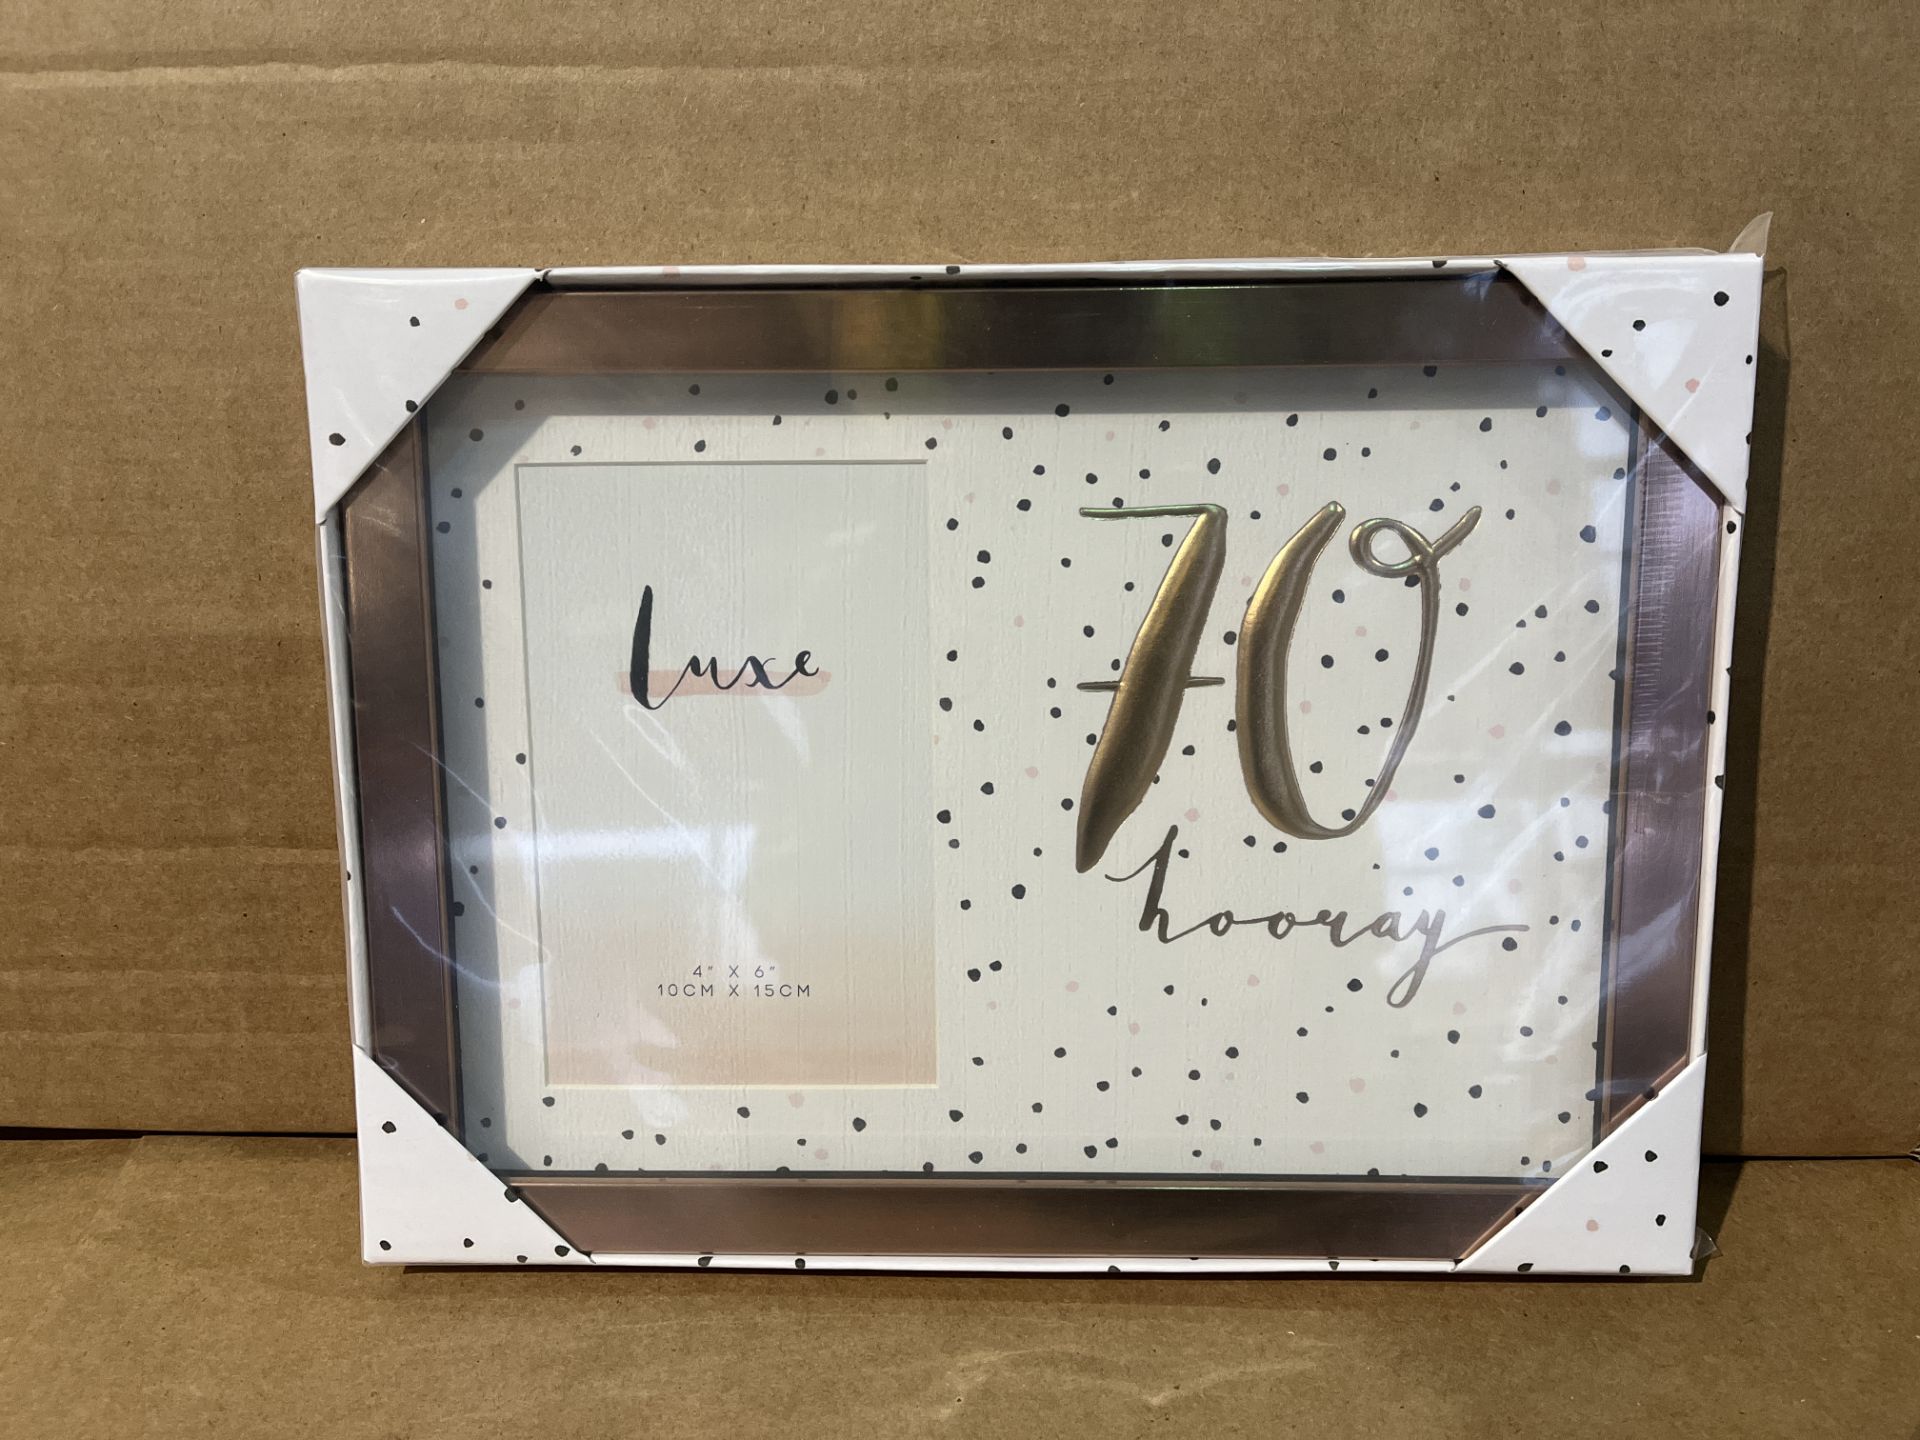 24 X BRAND NEW LUXURY PHOTO FRAMES 4 X 6 INCHES R15-3